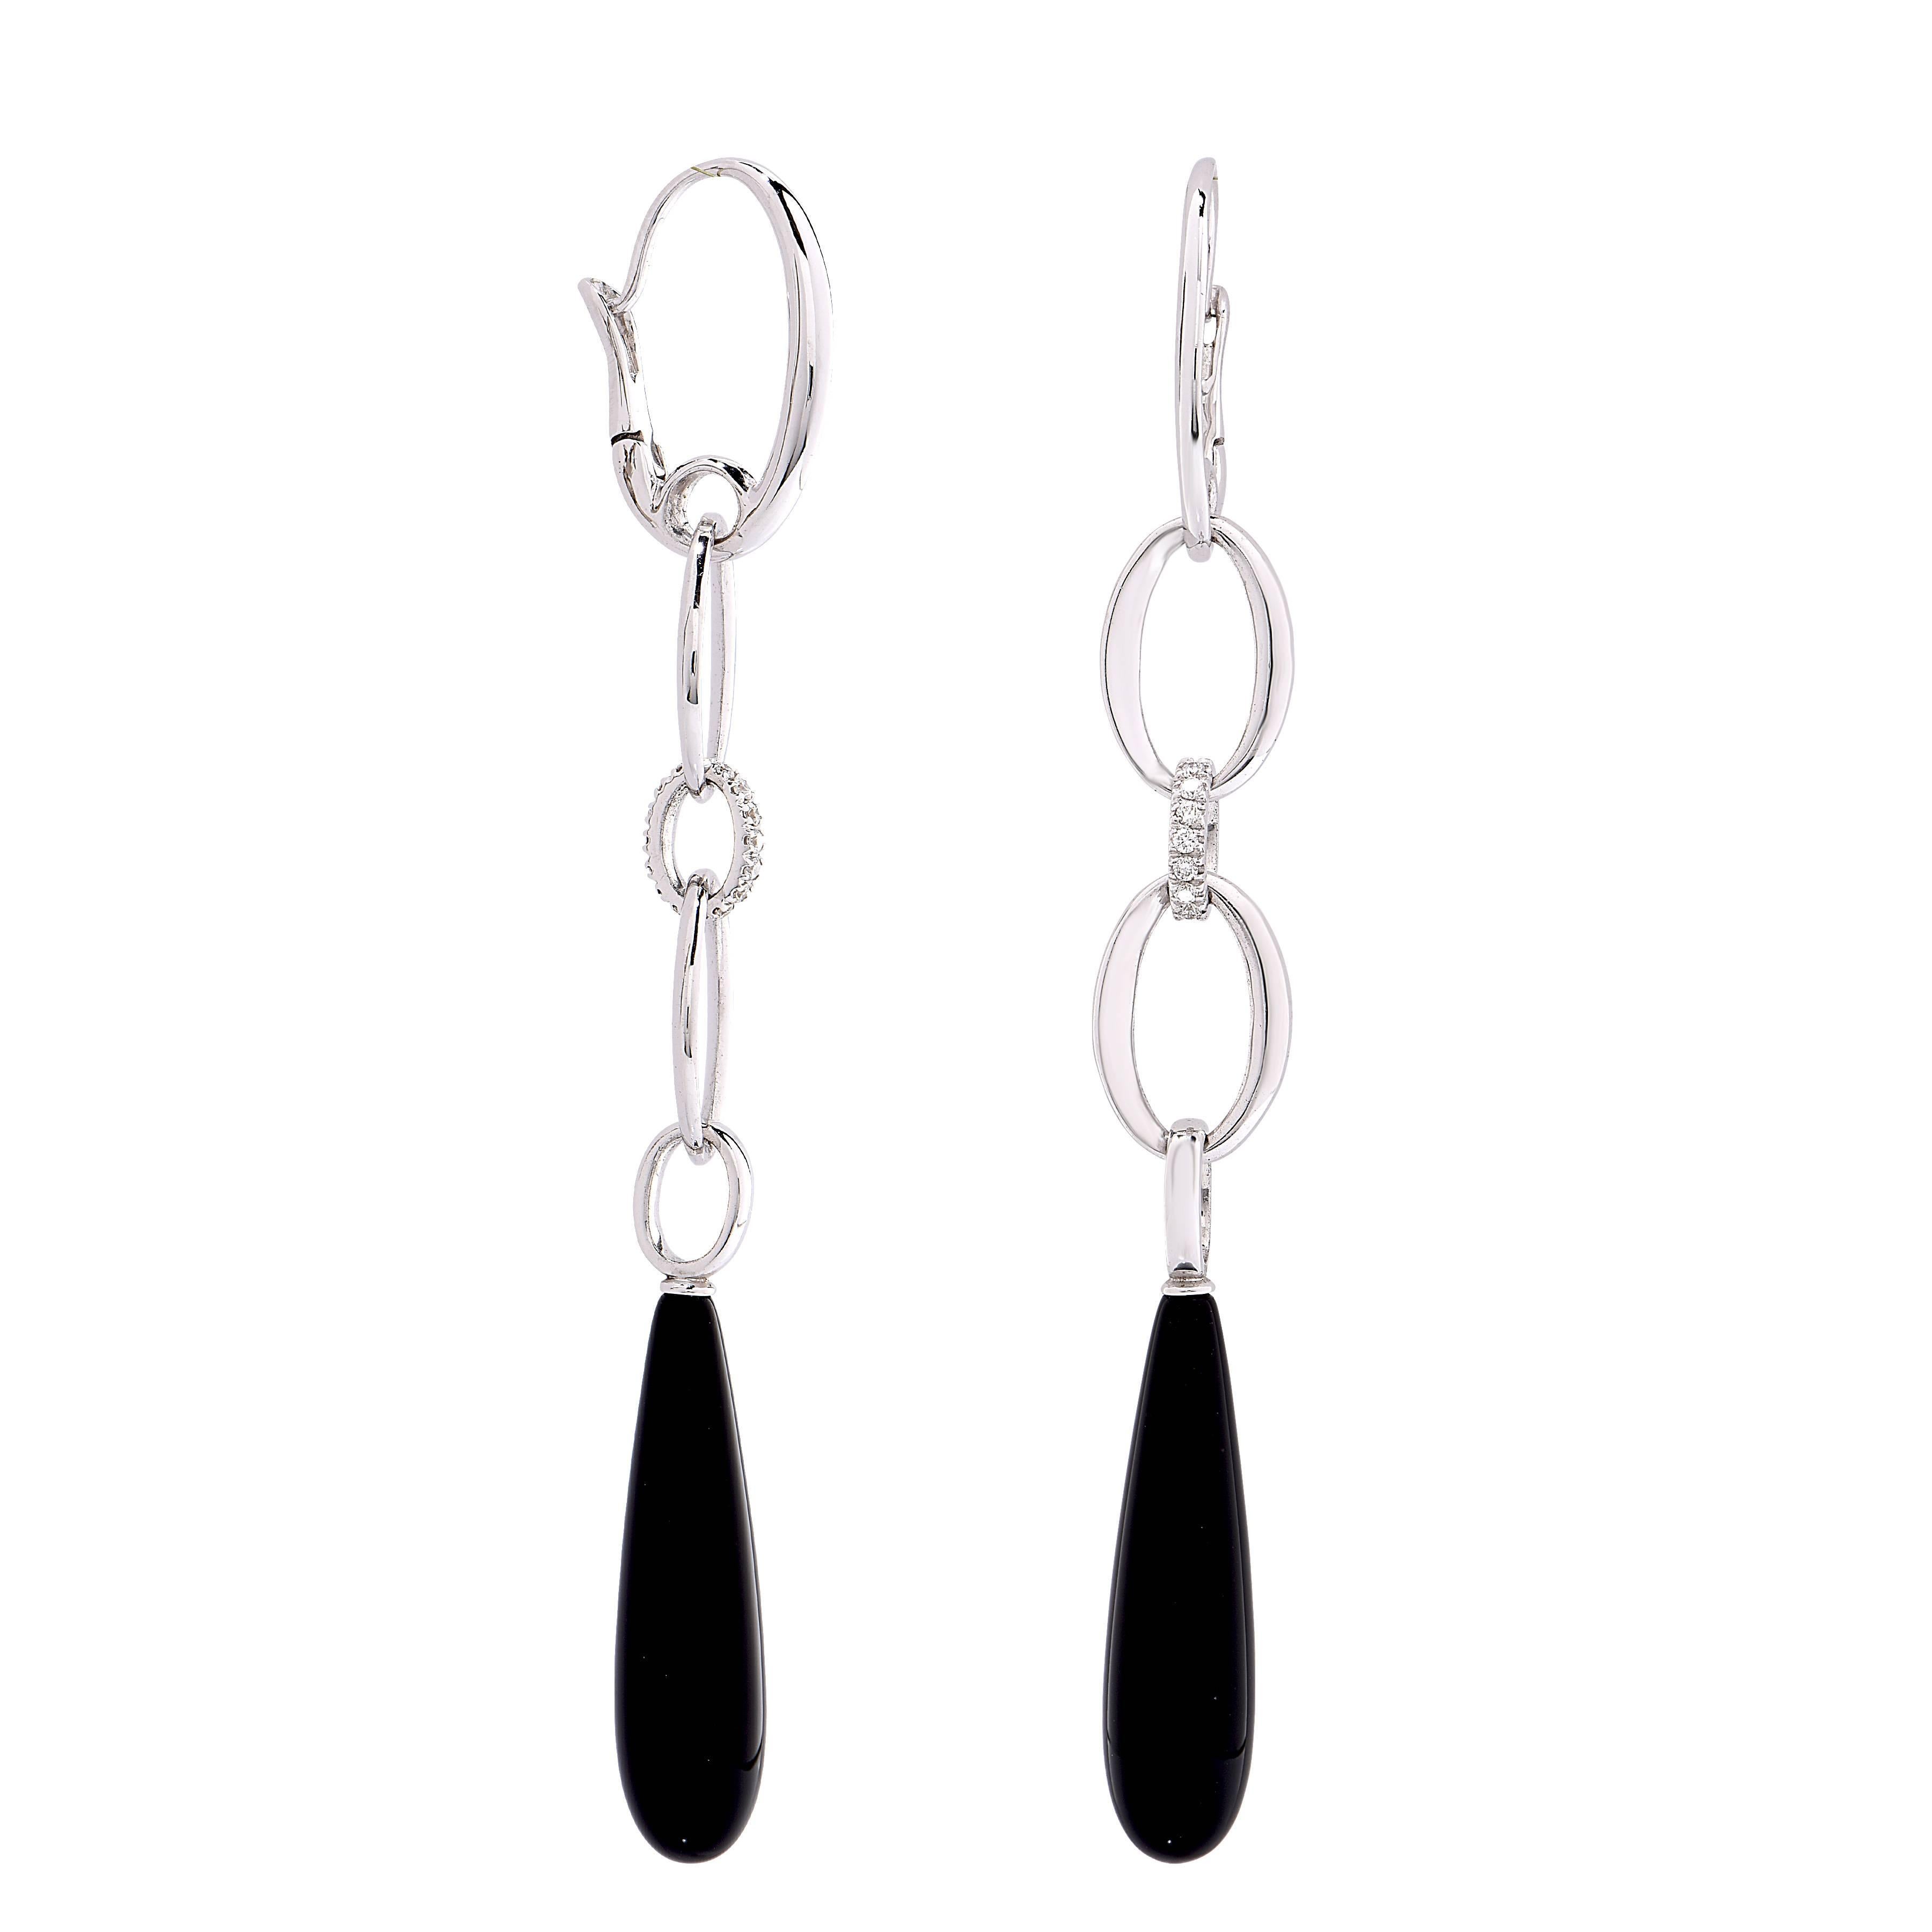 Onyx and Diamond 18 Karat White Gold drop earrings featuring two tear drop shaped onyx pieces with a total weight of 4.7 carats and 24 round cut diamonds with an estimated total weight of .28 carat.

Metal Type: 18Kt White Gold
Metal Weight: 14.5